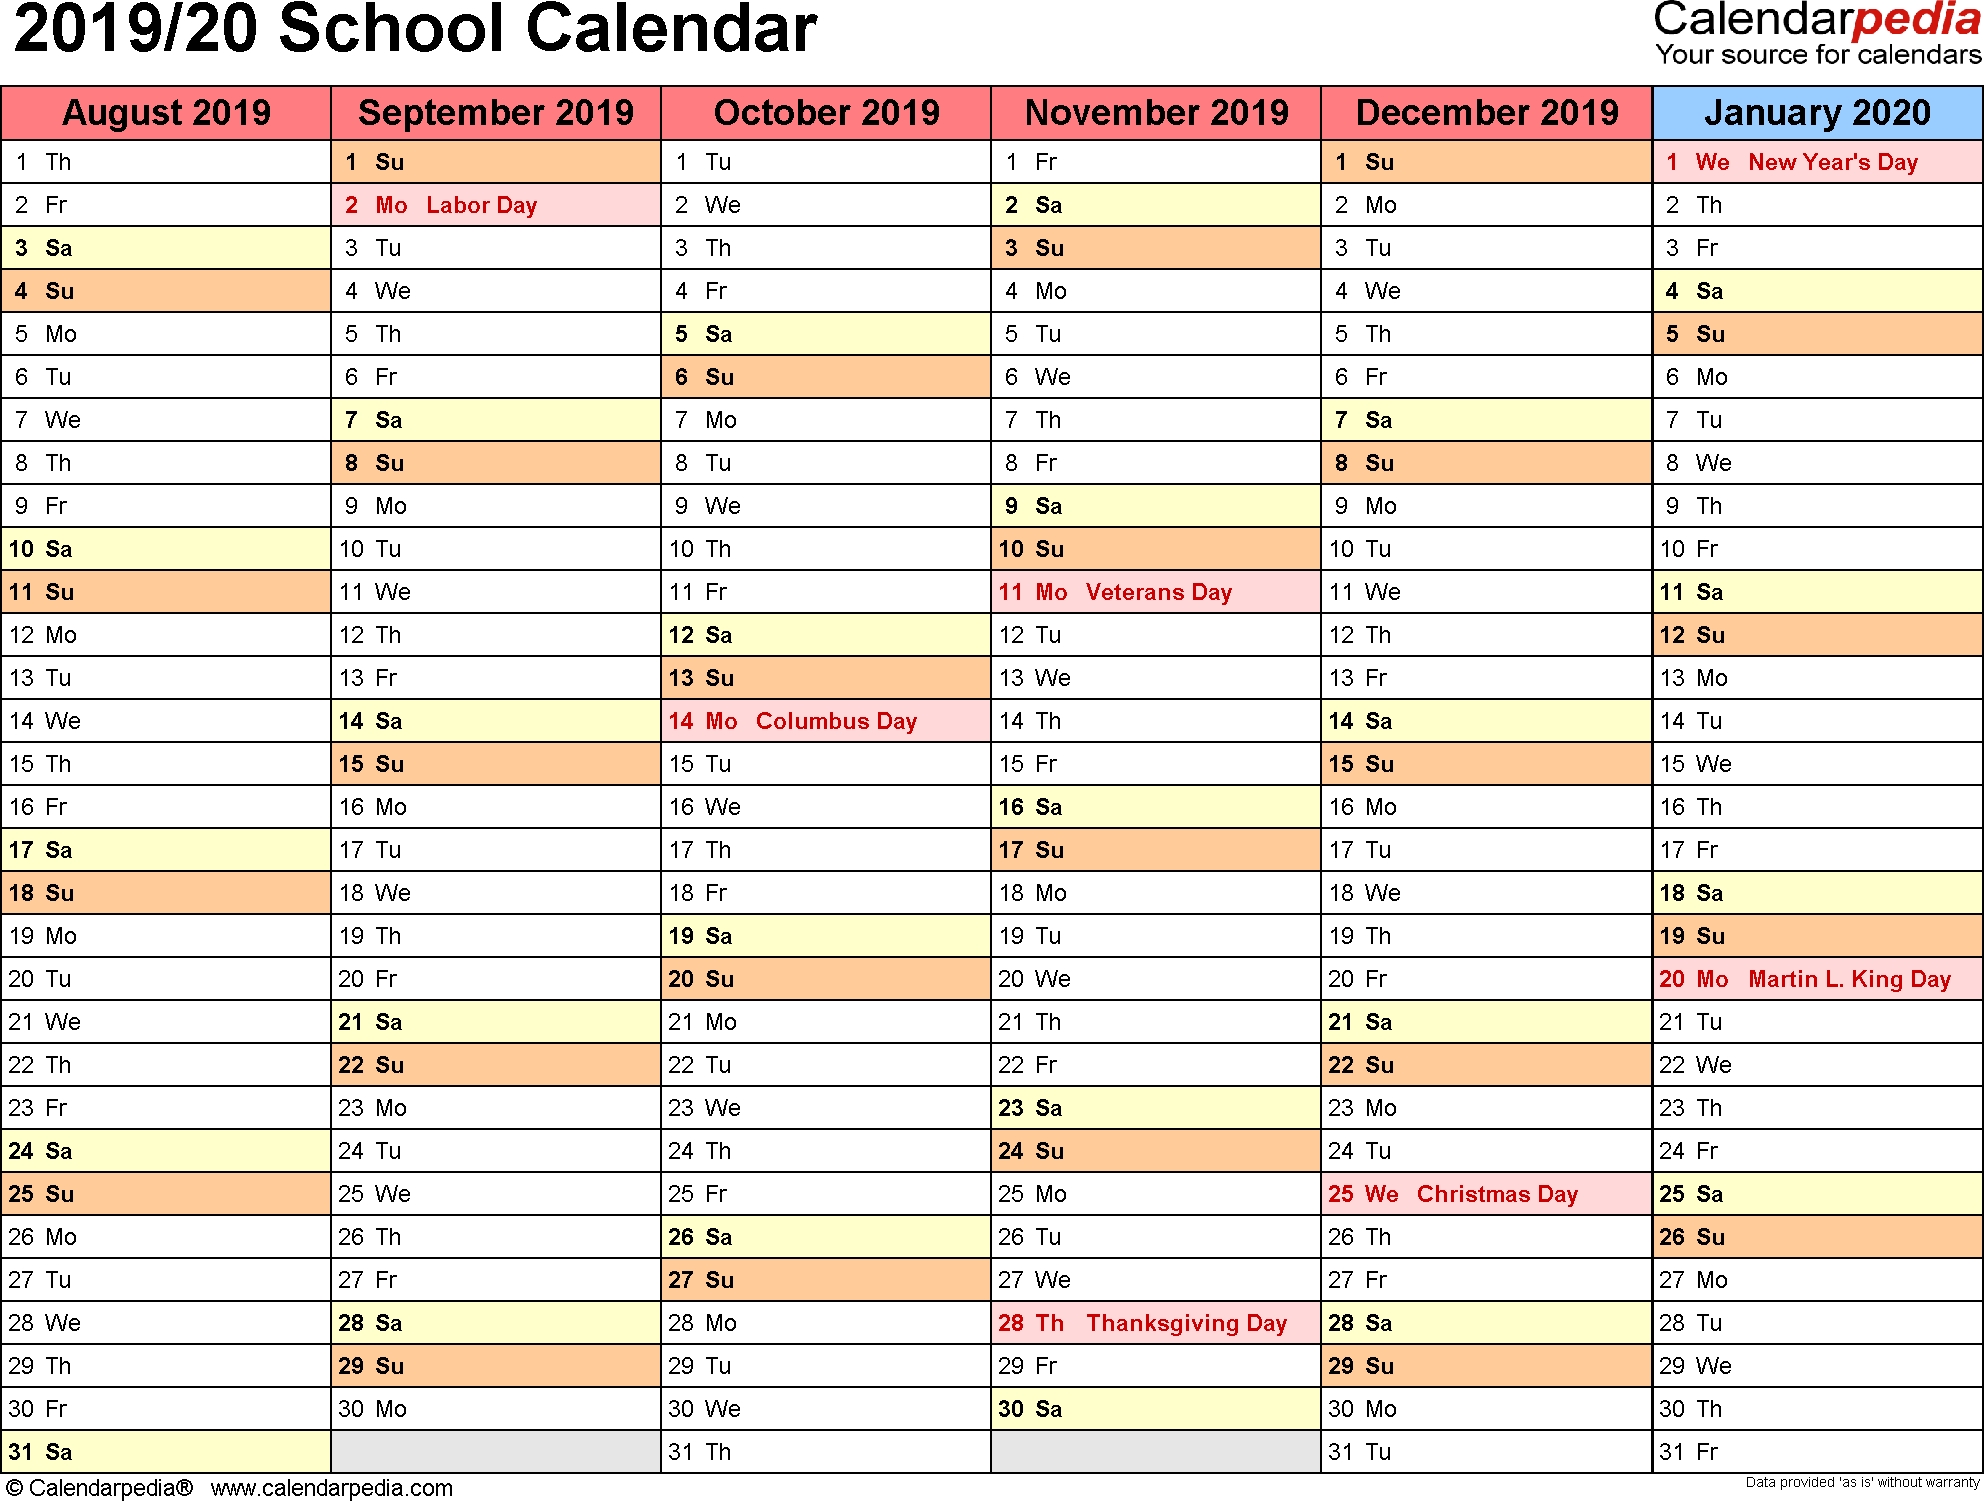 School Calendars 2019/2020 As Free Printable Pdf Templates throughout Year At A Glance Calendar 2019 2020